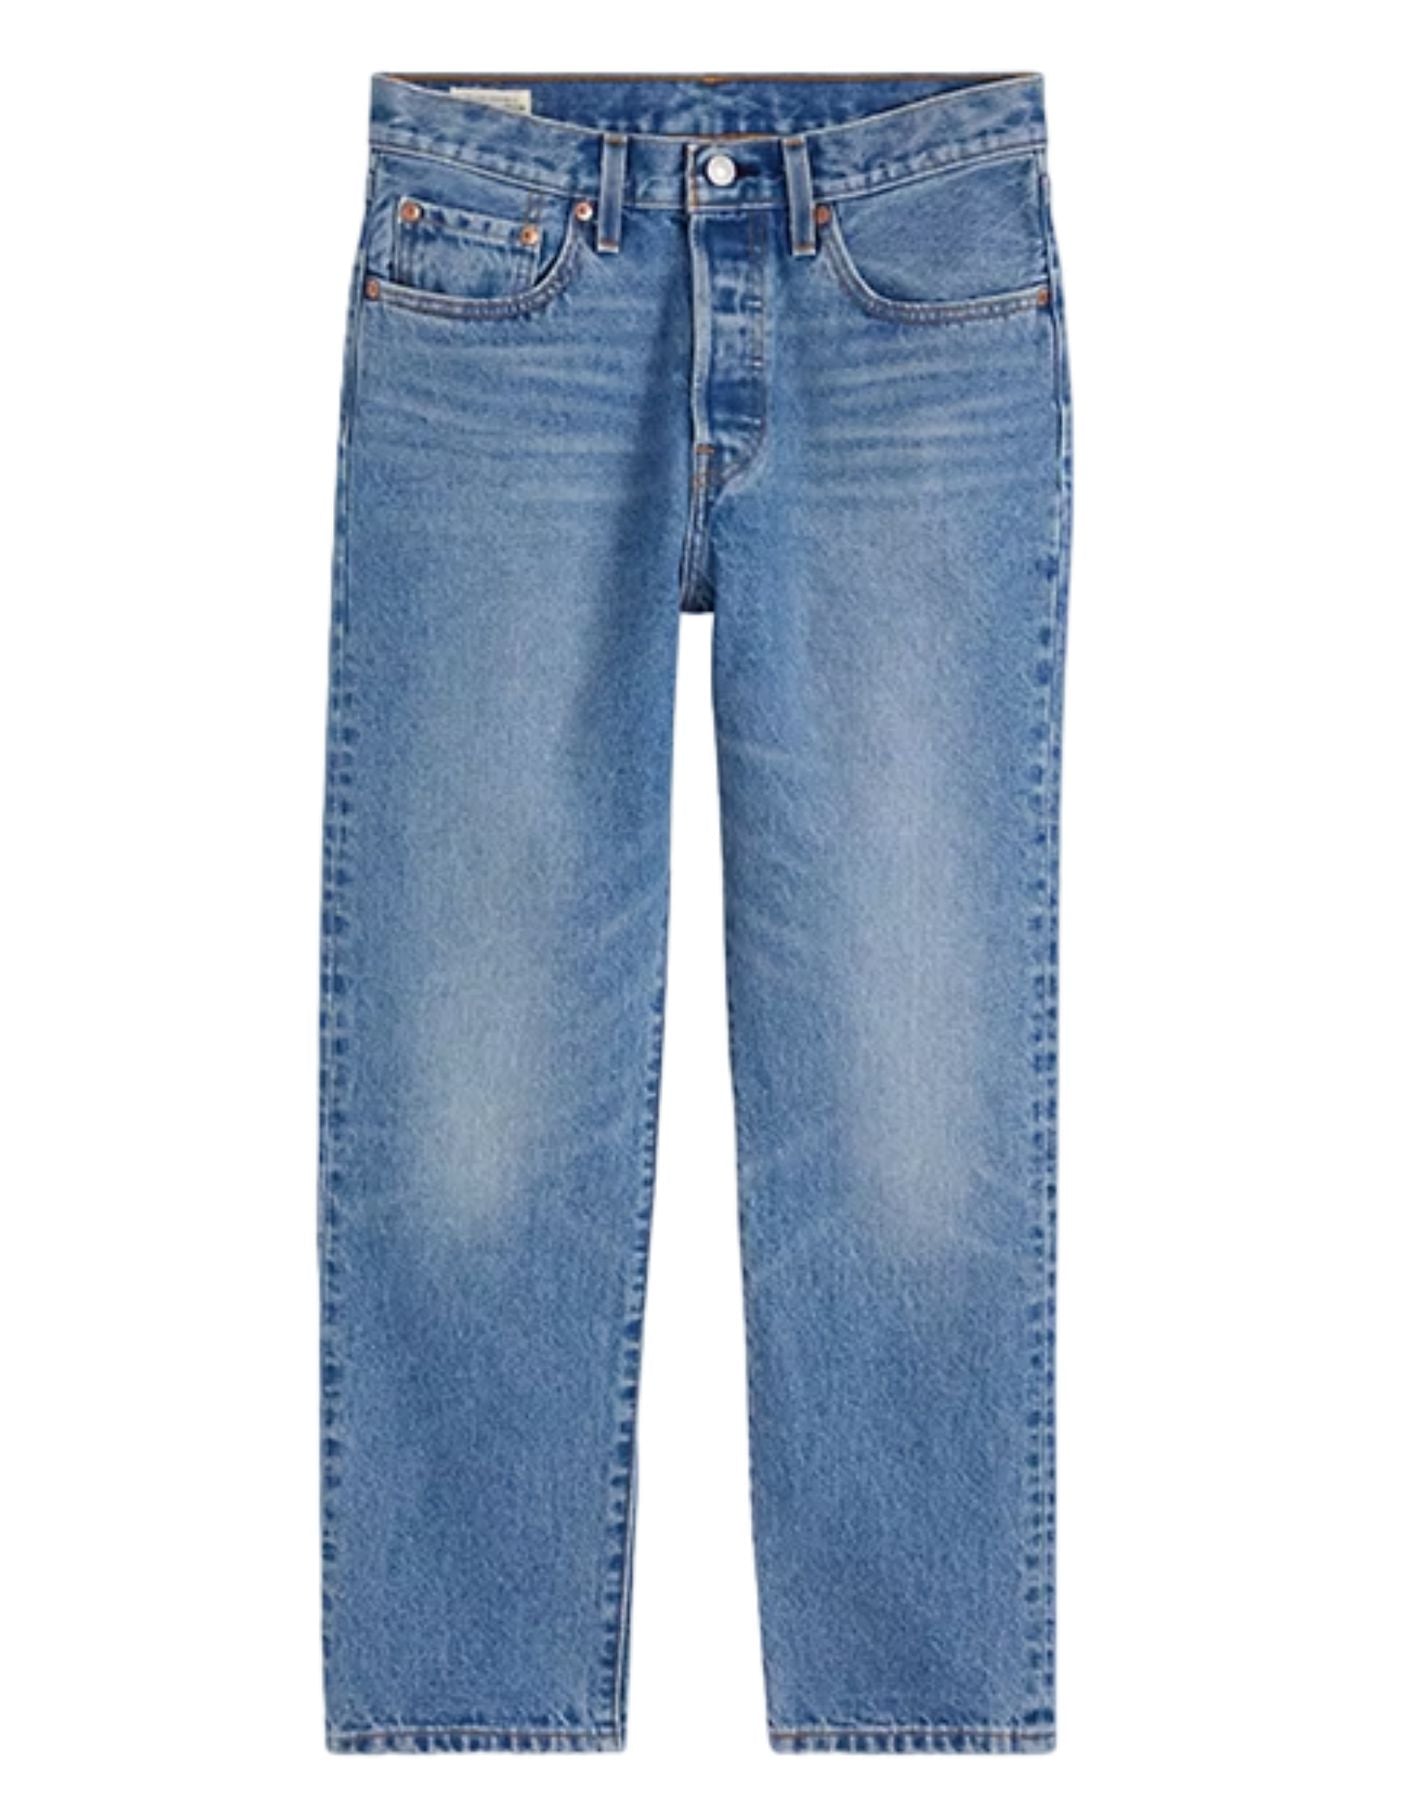 Jeans for woman 362000236 Levi's